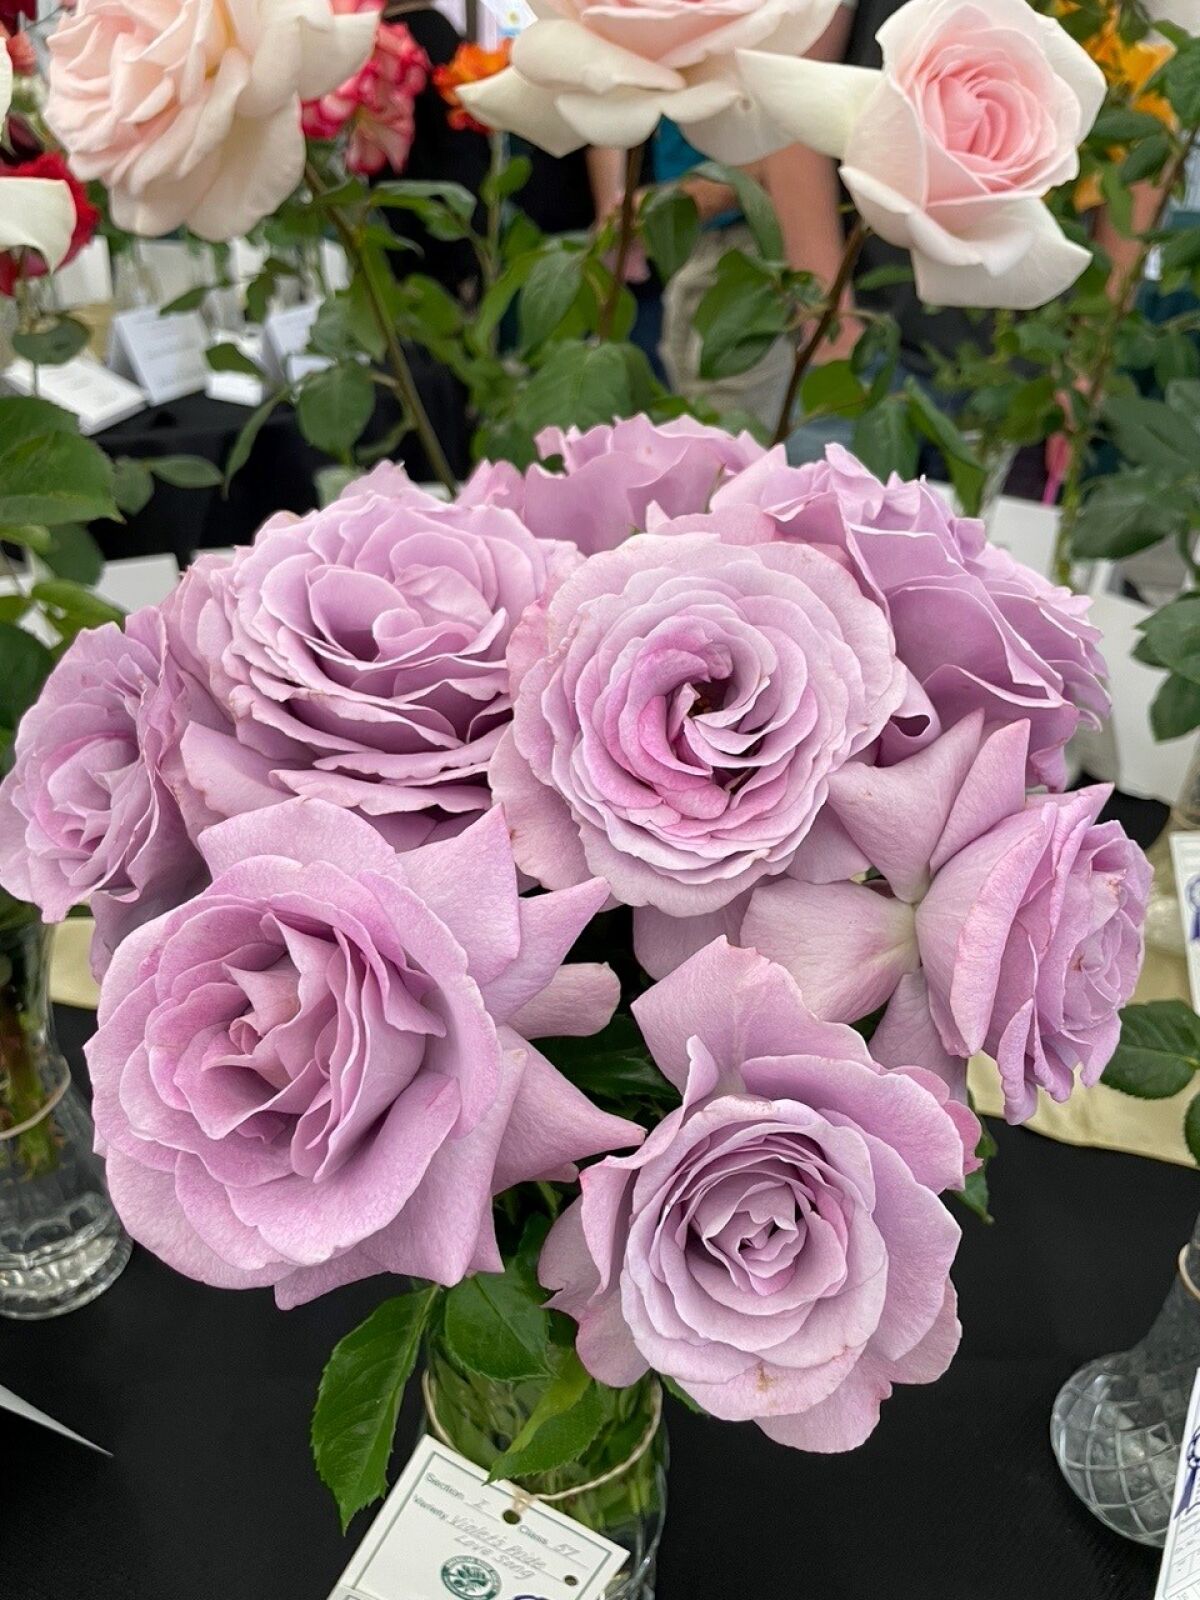 A vase holds roses with lavender blooms at the San Diego Rose Society's annual Rose Show.